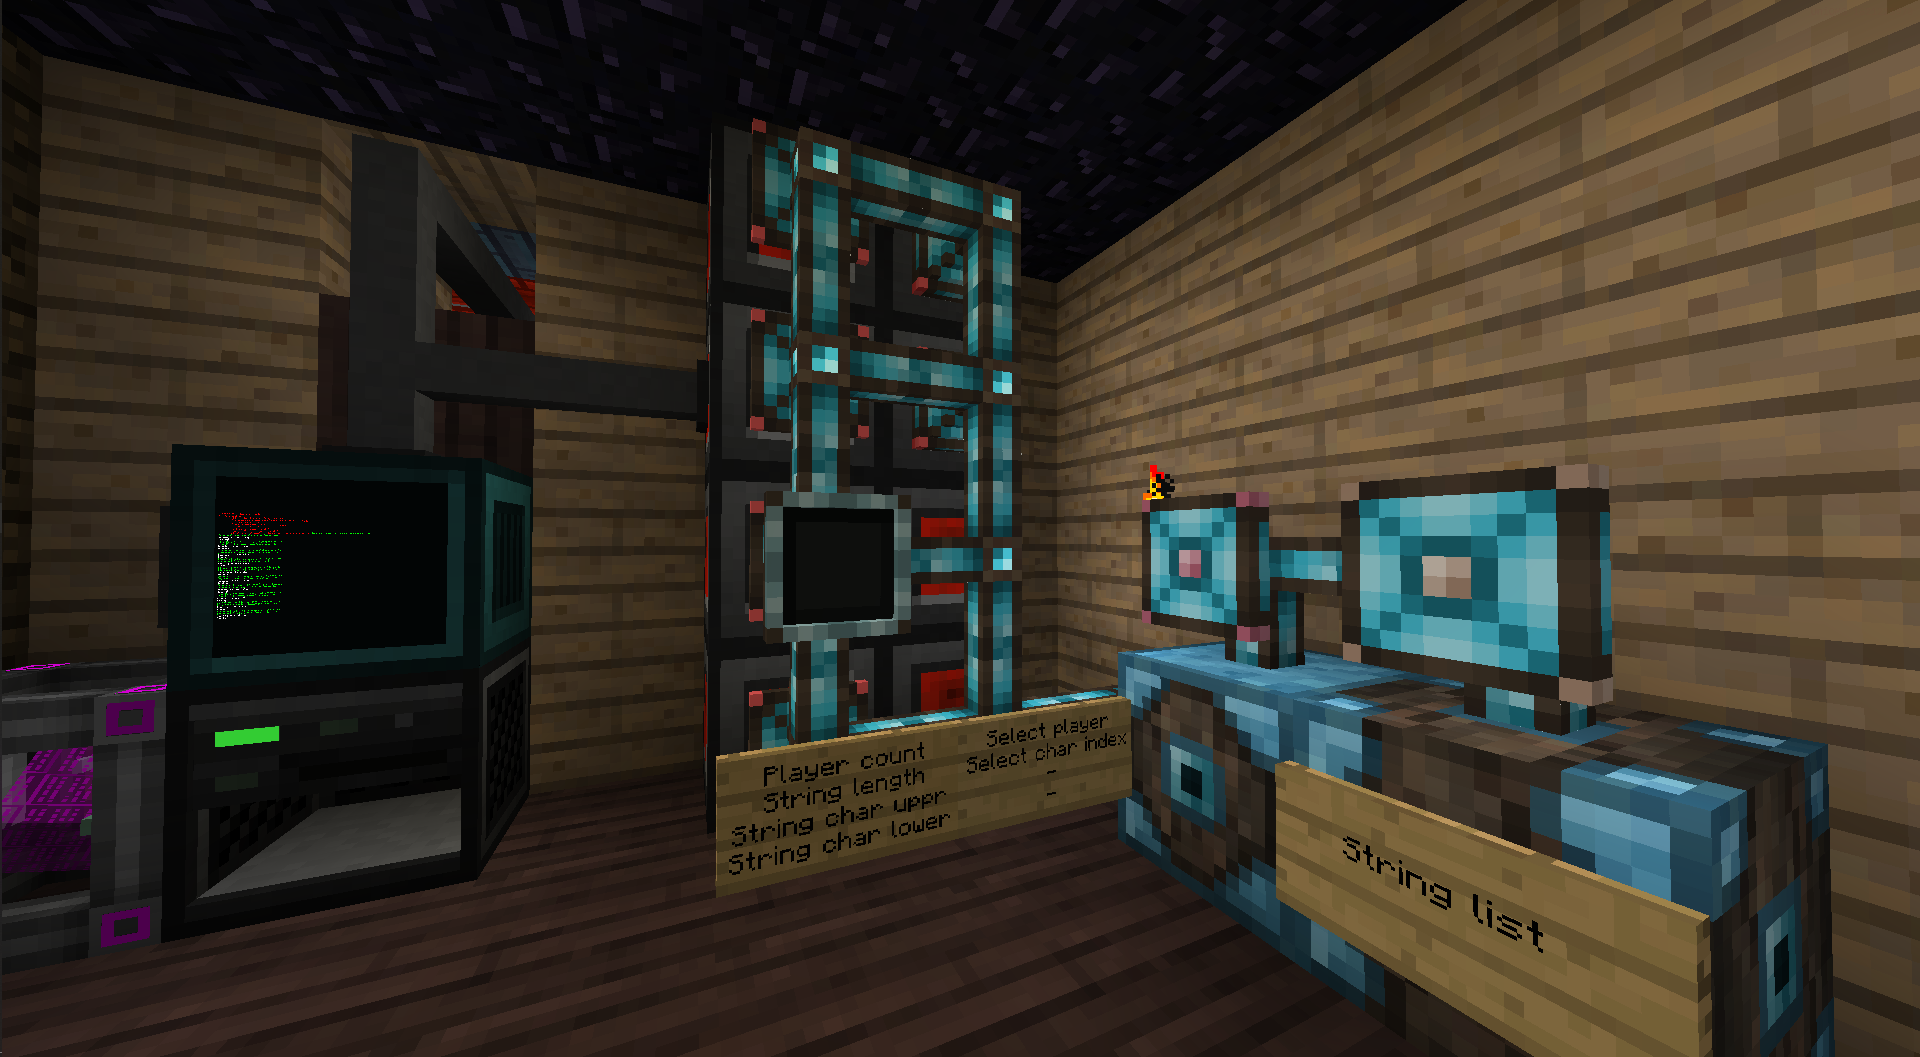 A computer on the left interfacing with a logic network on the right through vanilla redstone